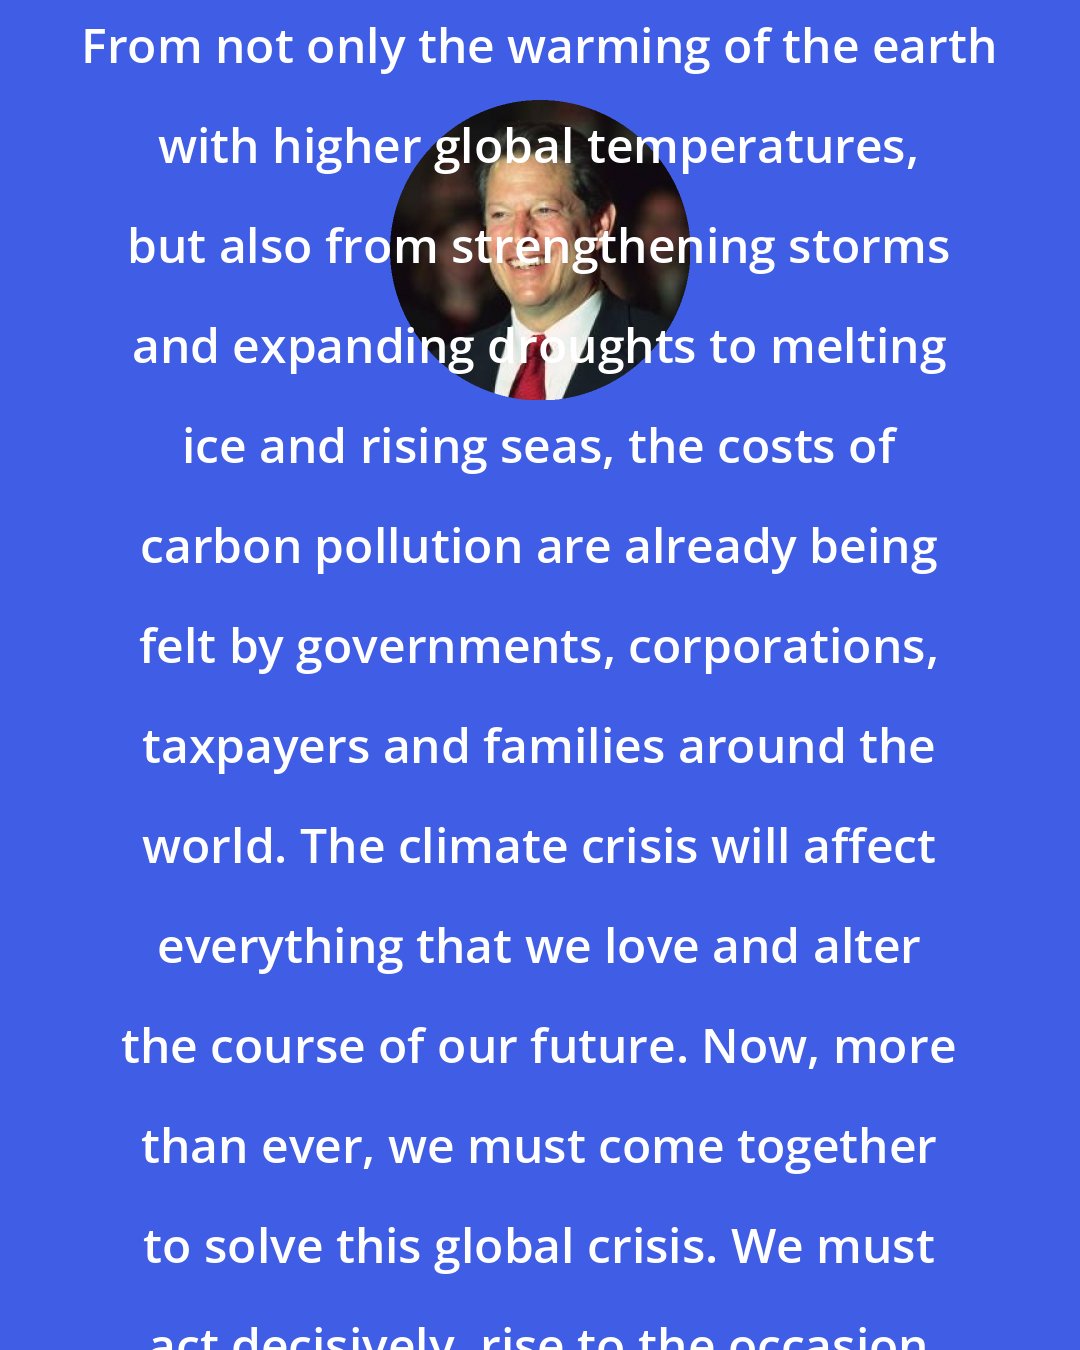 Al Gore: The climate crisis is the greatest challenge humanity has ever faced. From not only the warming of the earth with higher global temperatures, but also from strengthening storms and expanding droughts to melting ice and rising seas, the costs of carbon pollution are already being felt by governments, corporations, taxpayers and families around the world. The climate crisis will affect everything that we love and alter the course of our future. Now, more than ever, we must come together to solve this global crisis. We must act decisively, rise to the occasion and solve this monumental challenge.